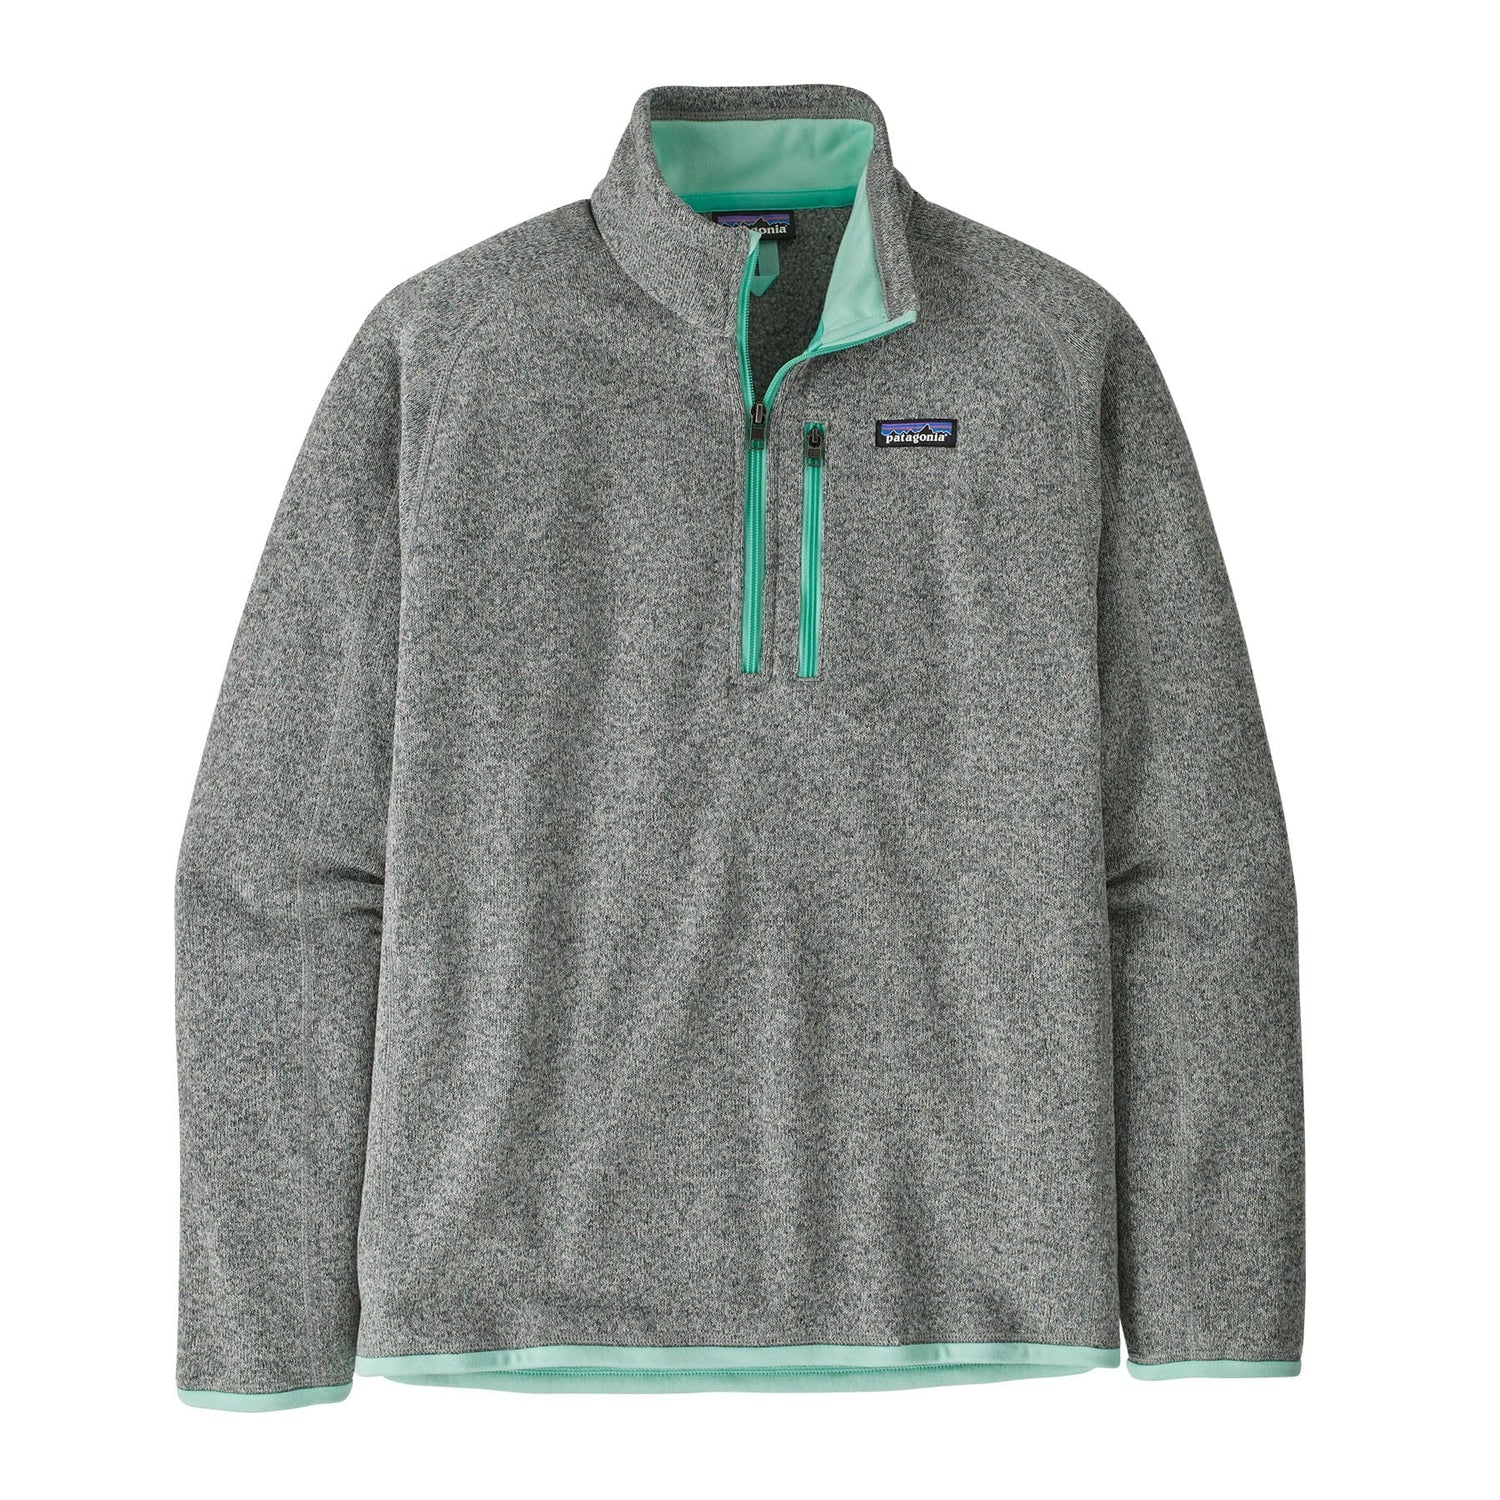 Patagonia M's Better Sweater 1/4 Zip Fleece - 100% Recycled Polyester Stonewash w/Early Teal Shirt